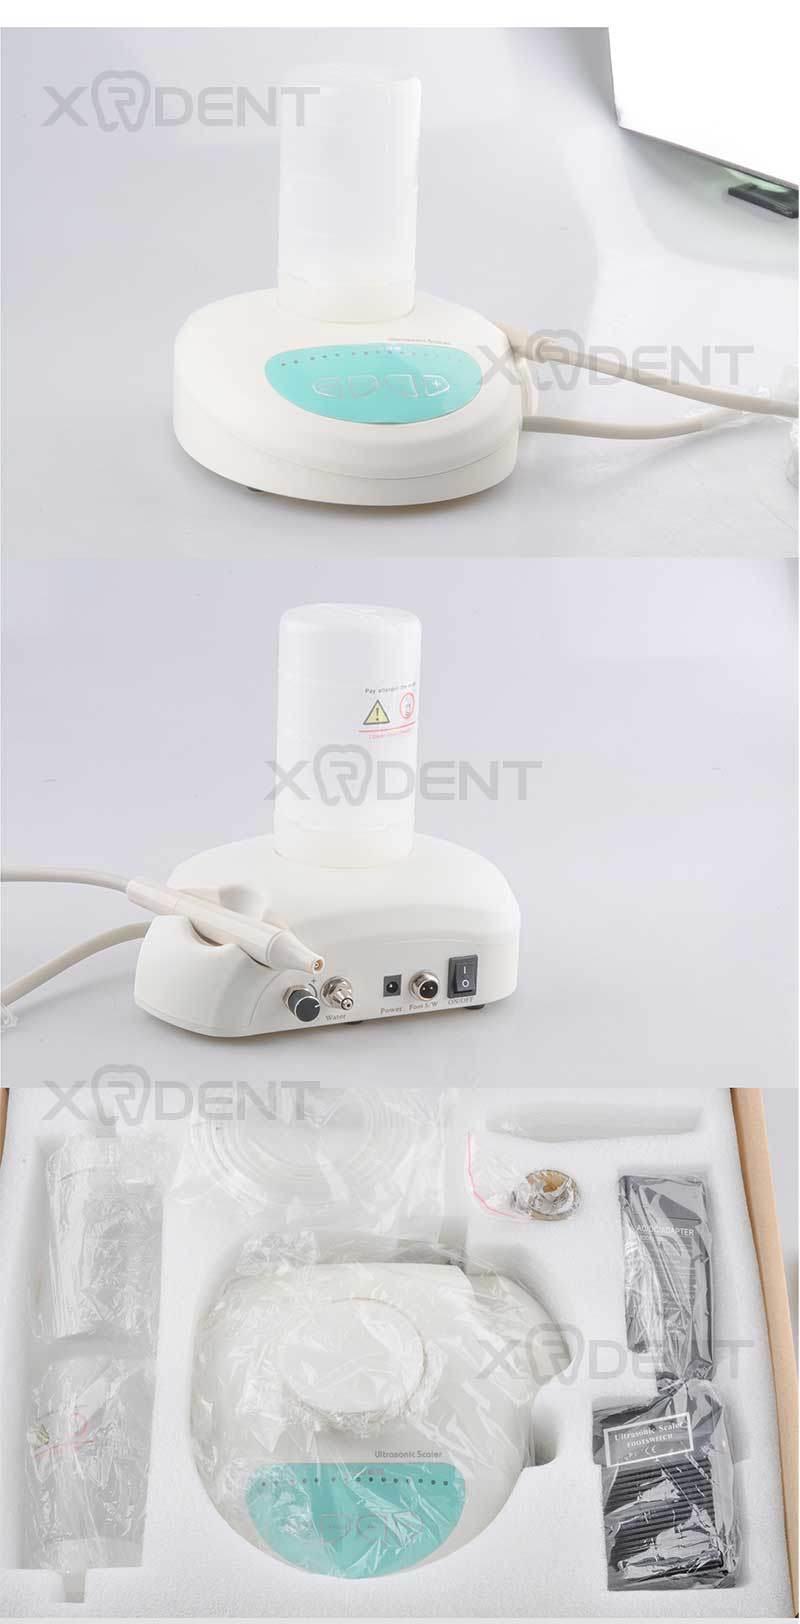 Dental Ultrasonic Scaler Machines Are Available at The Best Price